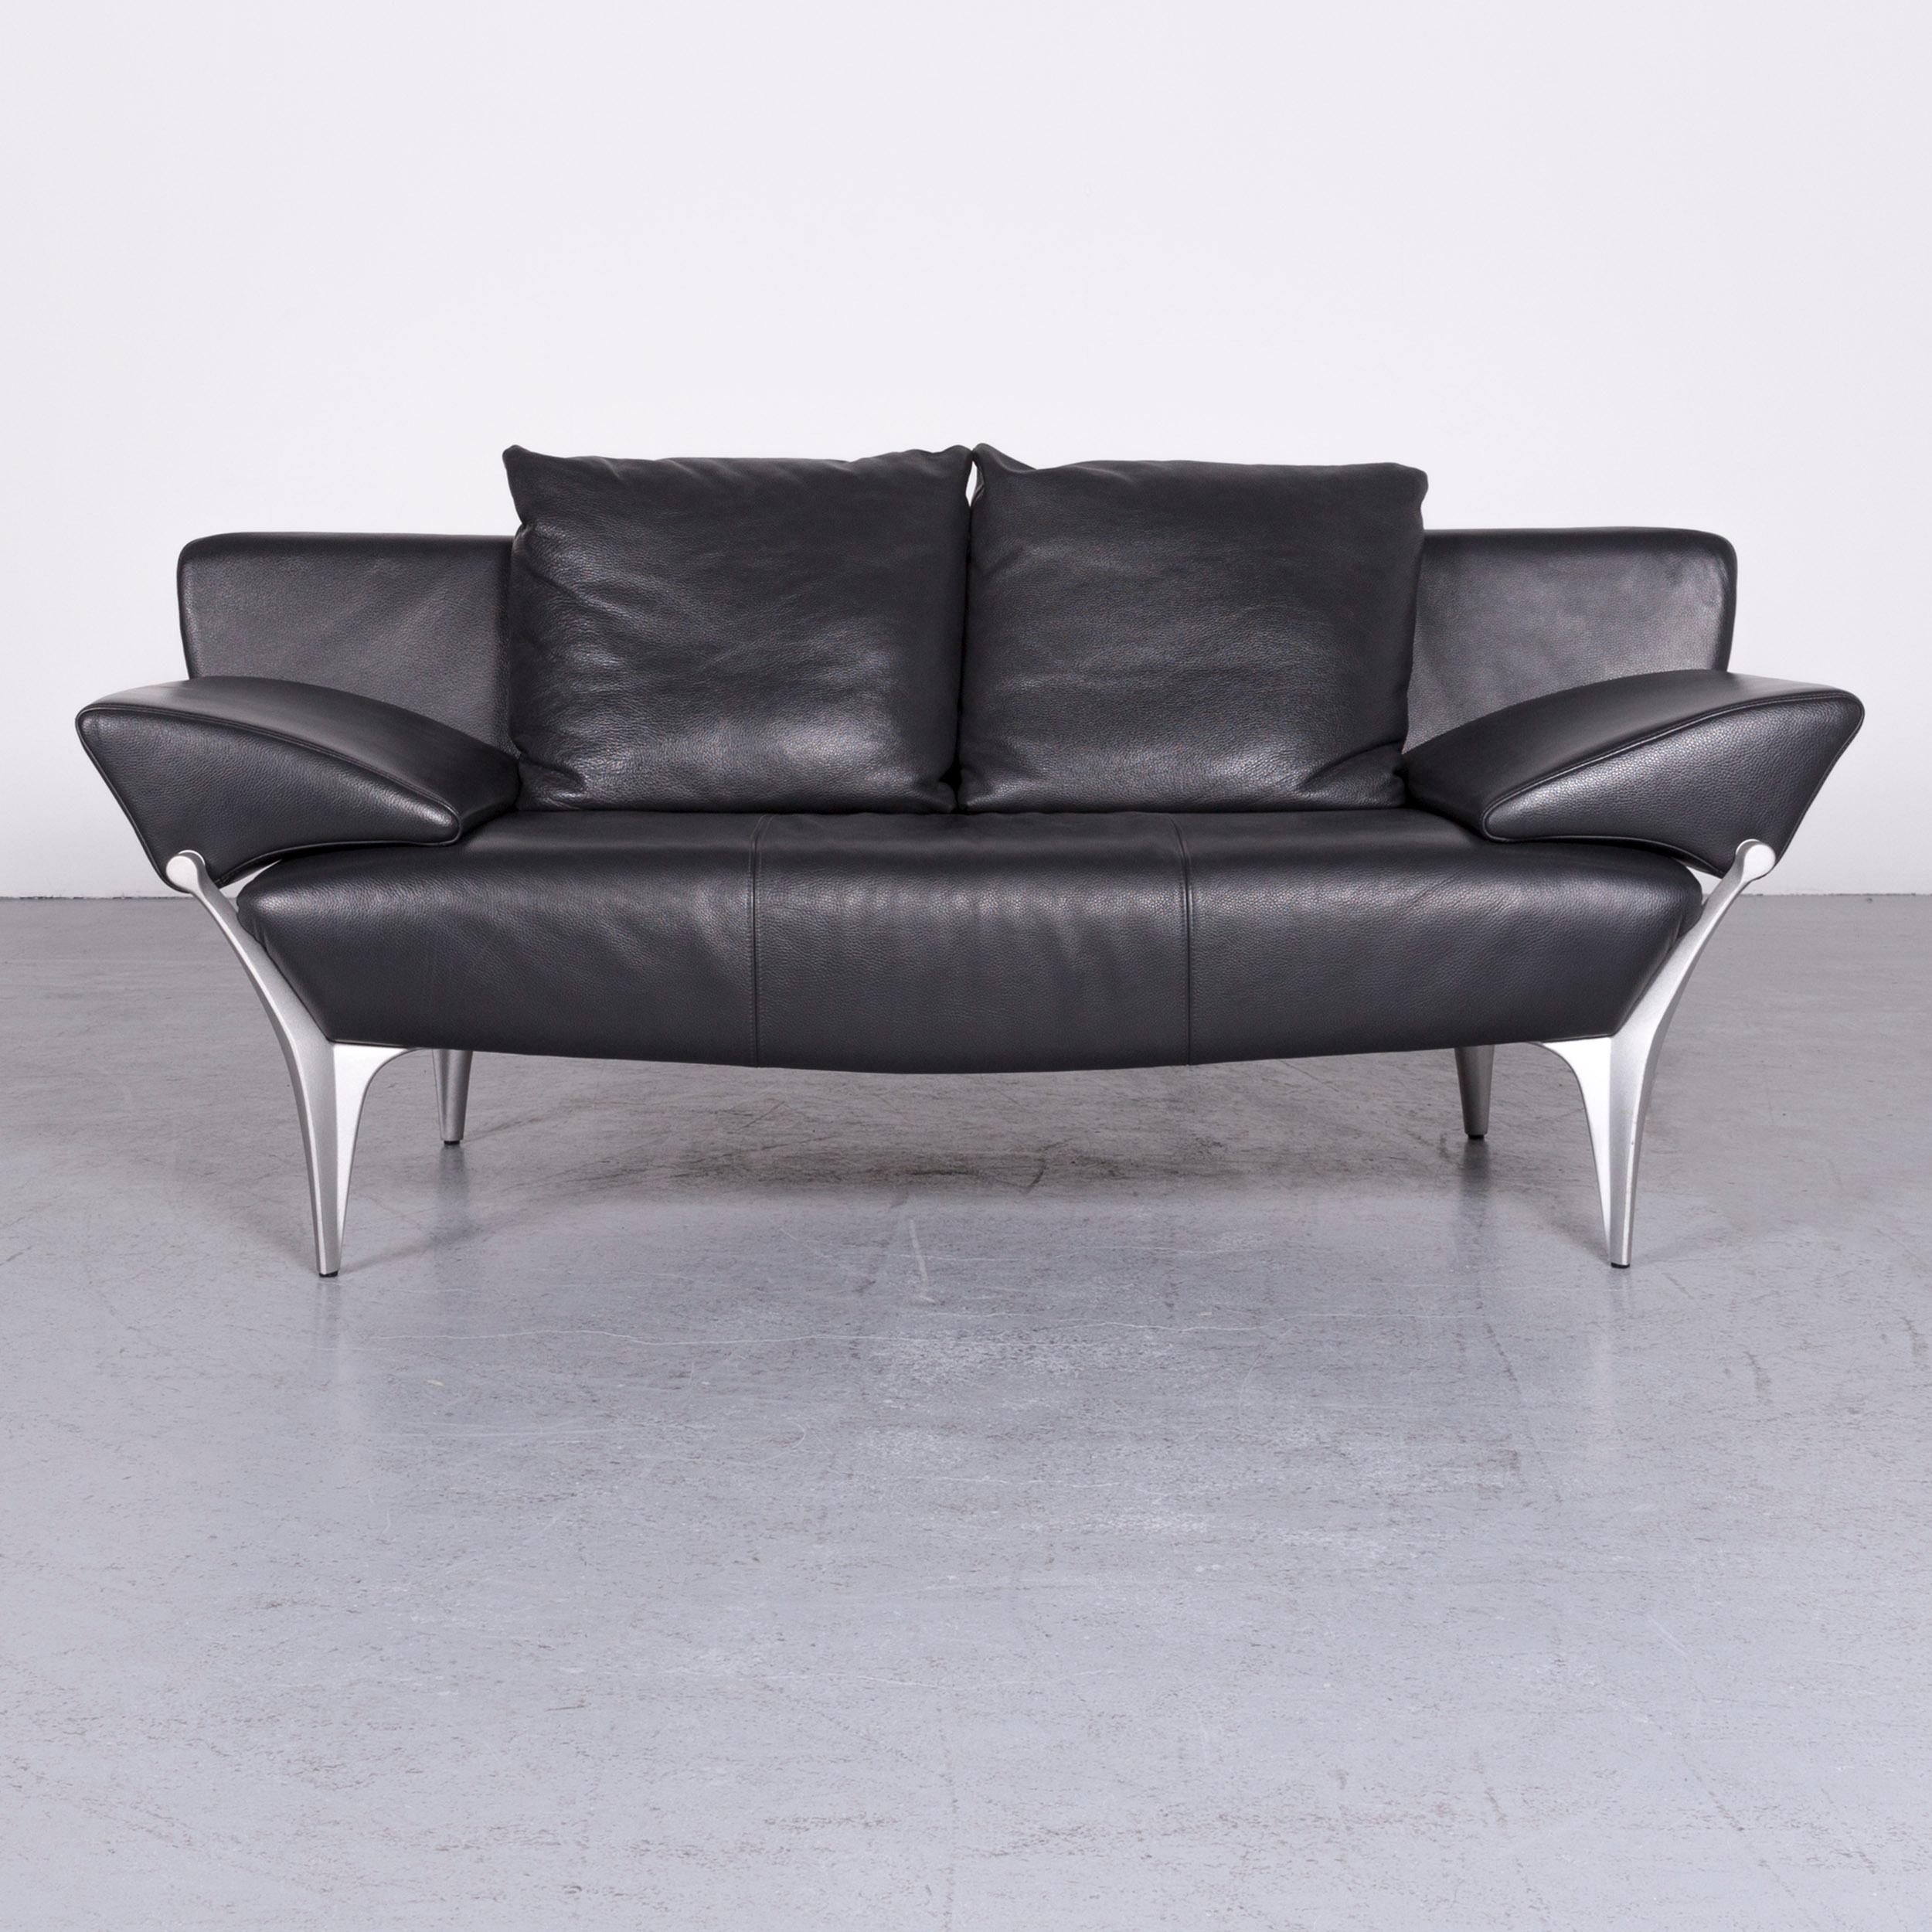 We bring to you a Rolf Benz 1600 designer leather sofa set black two-seat three-seat couch.